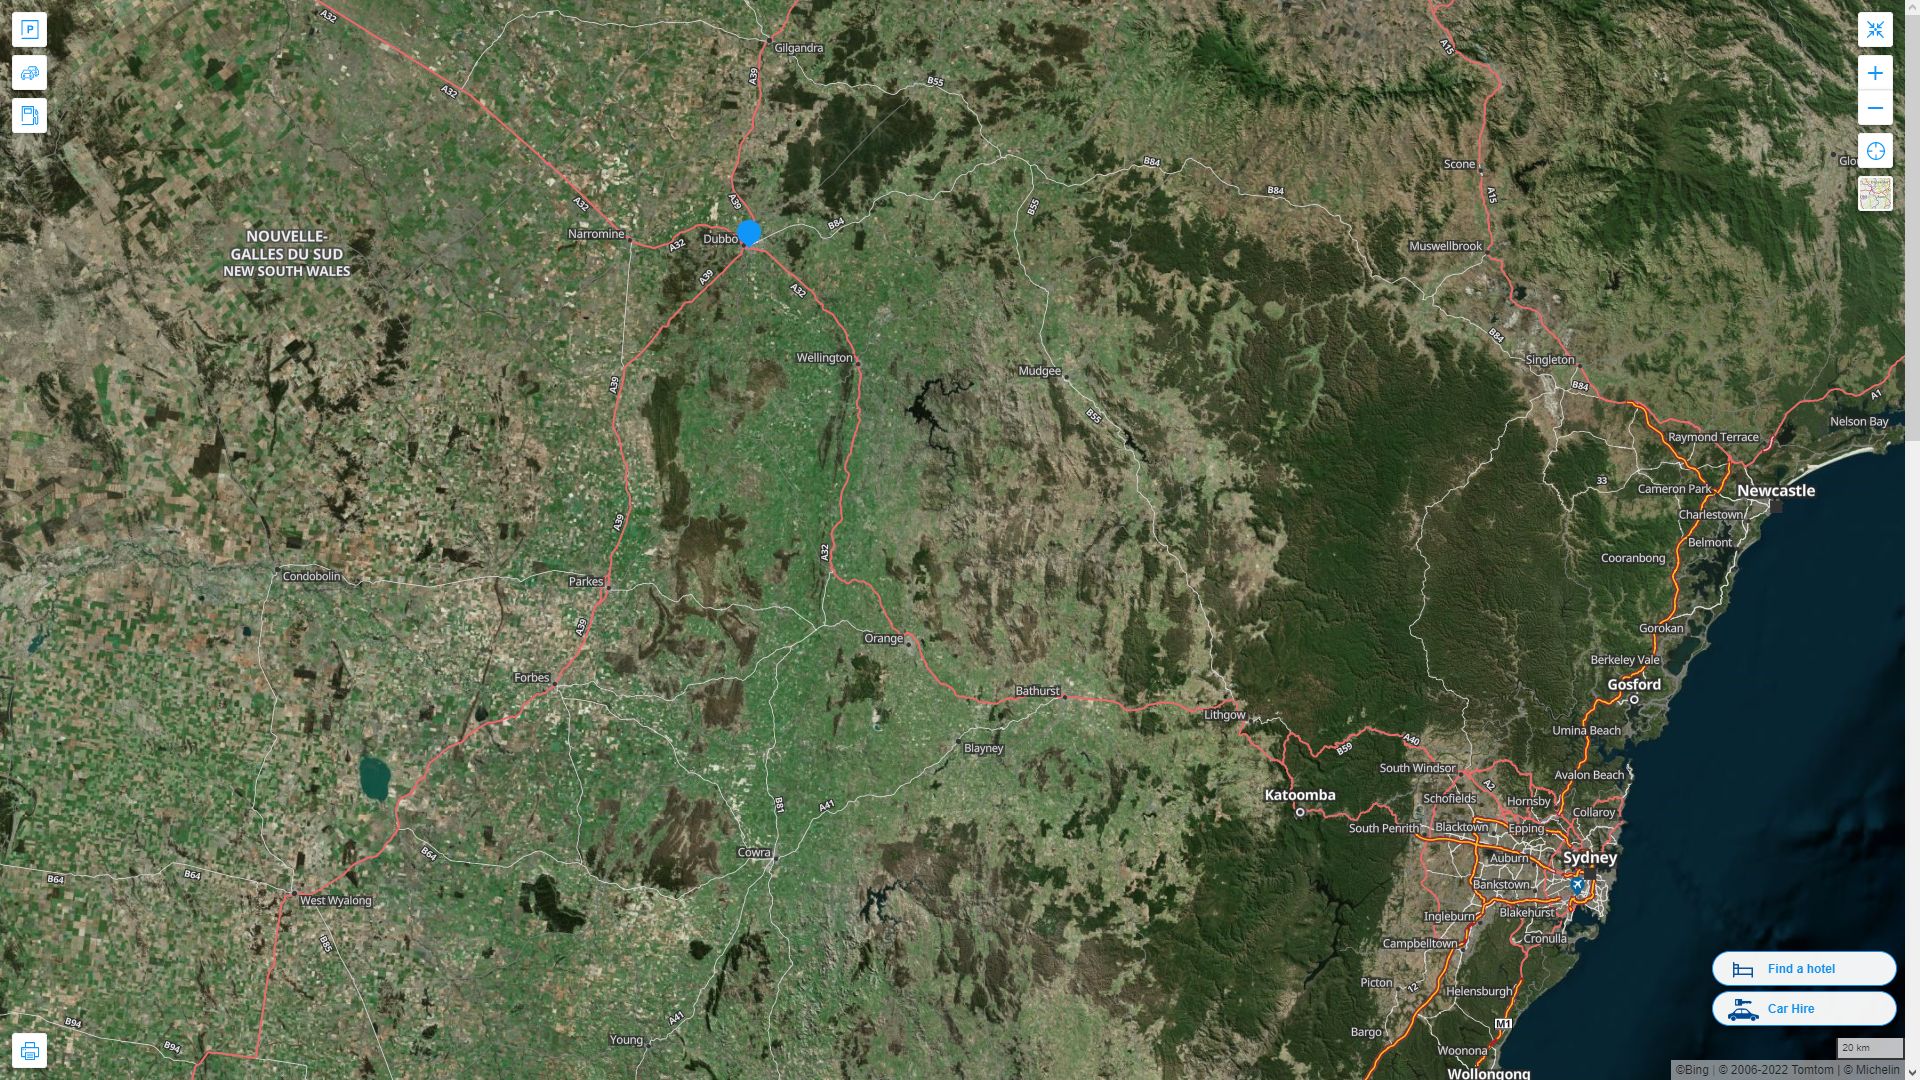 dubbo Highway and Road Map with Satellite View